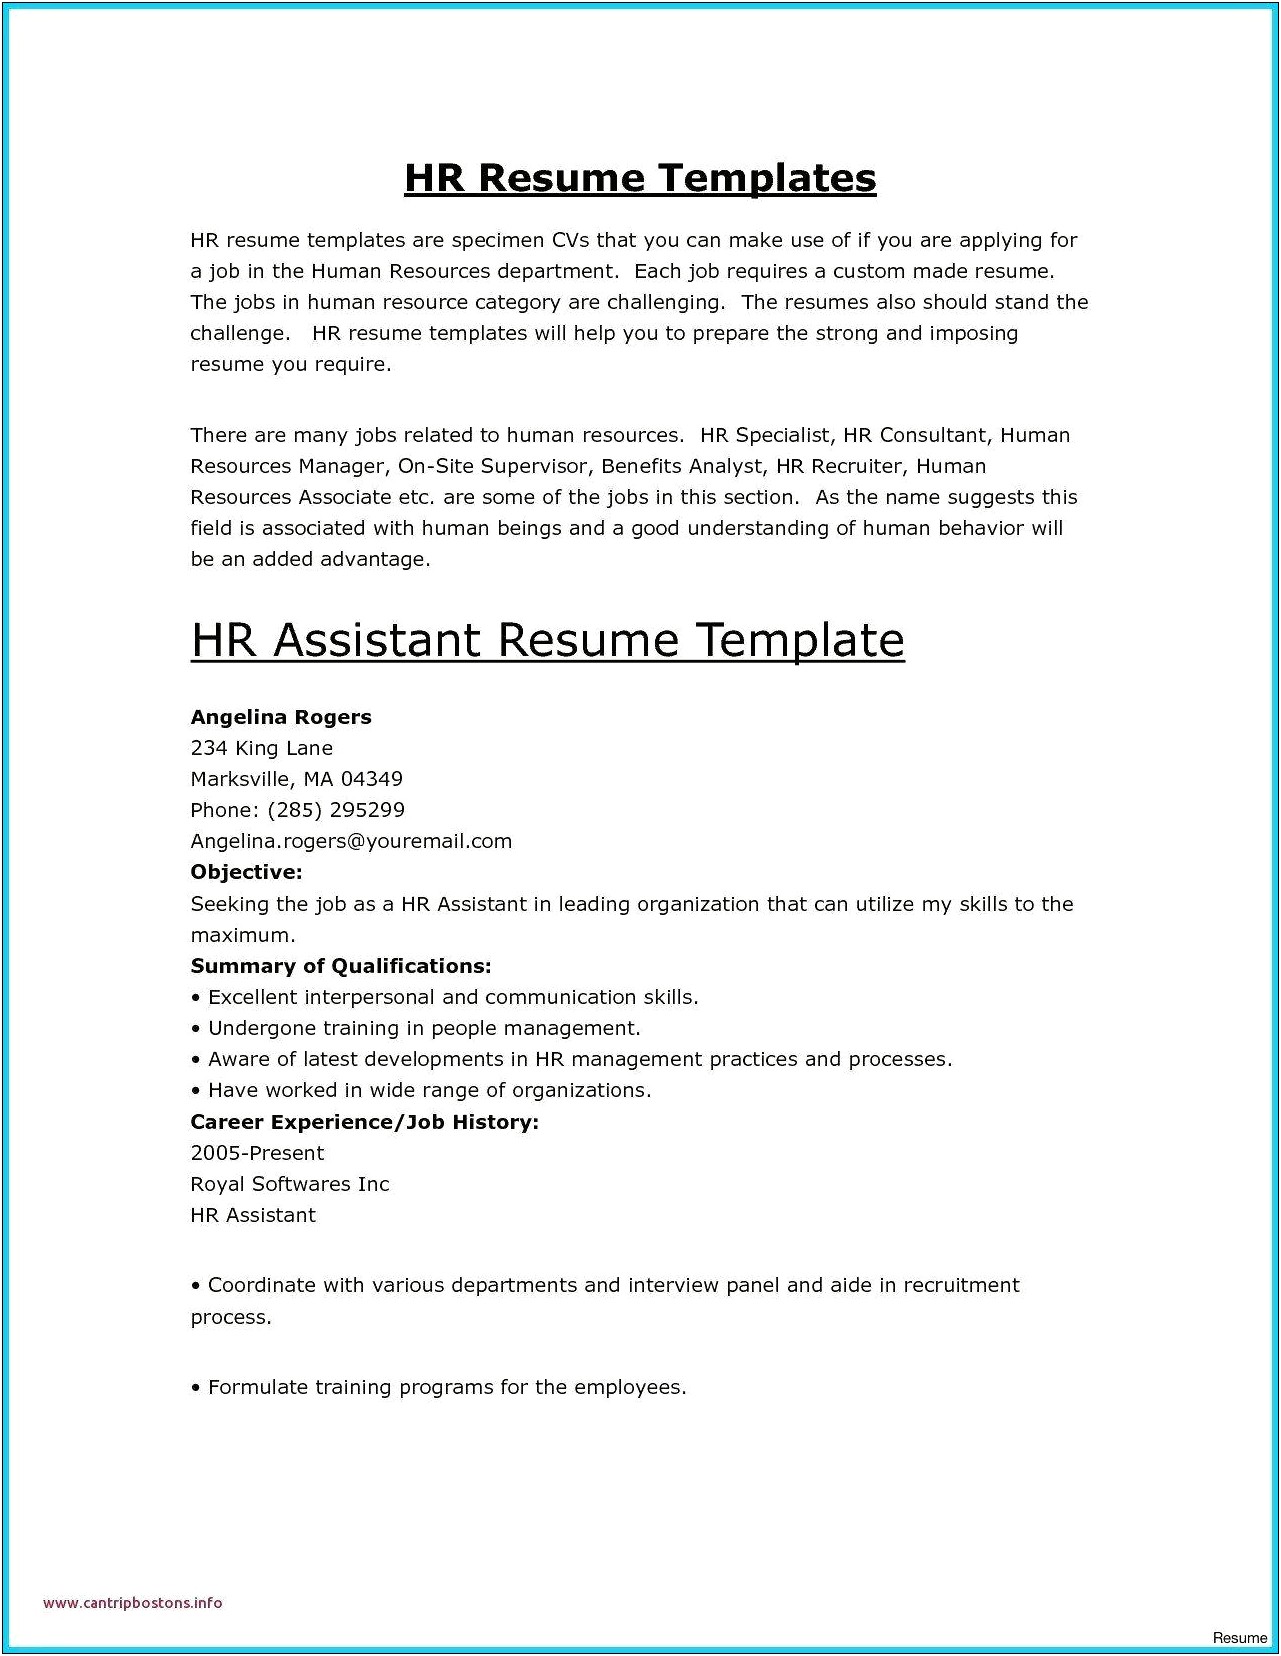 Resume Format For Hr Counsellor Job